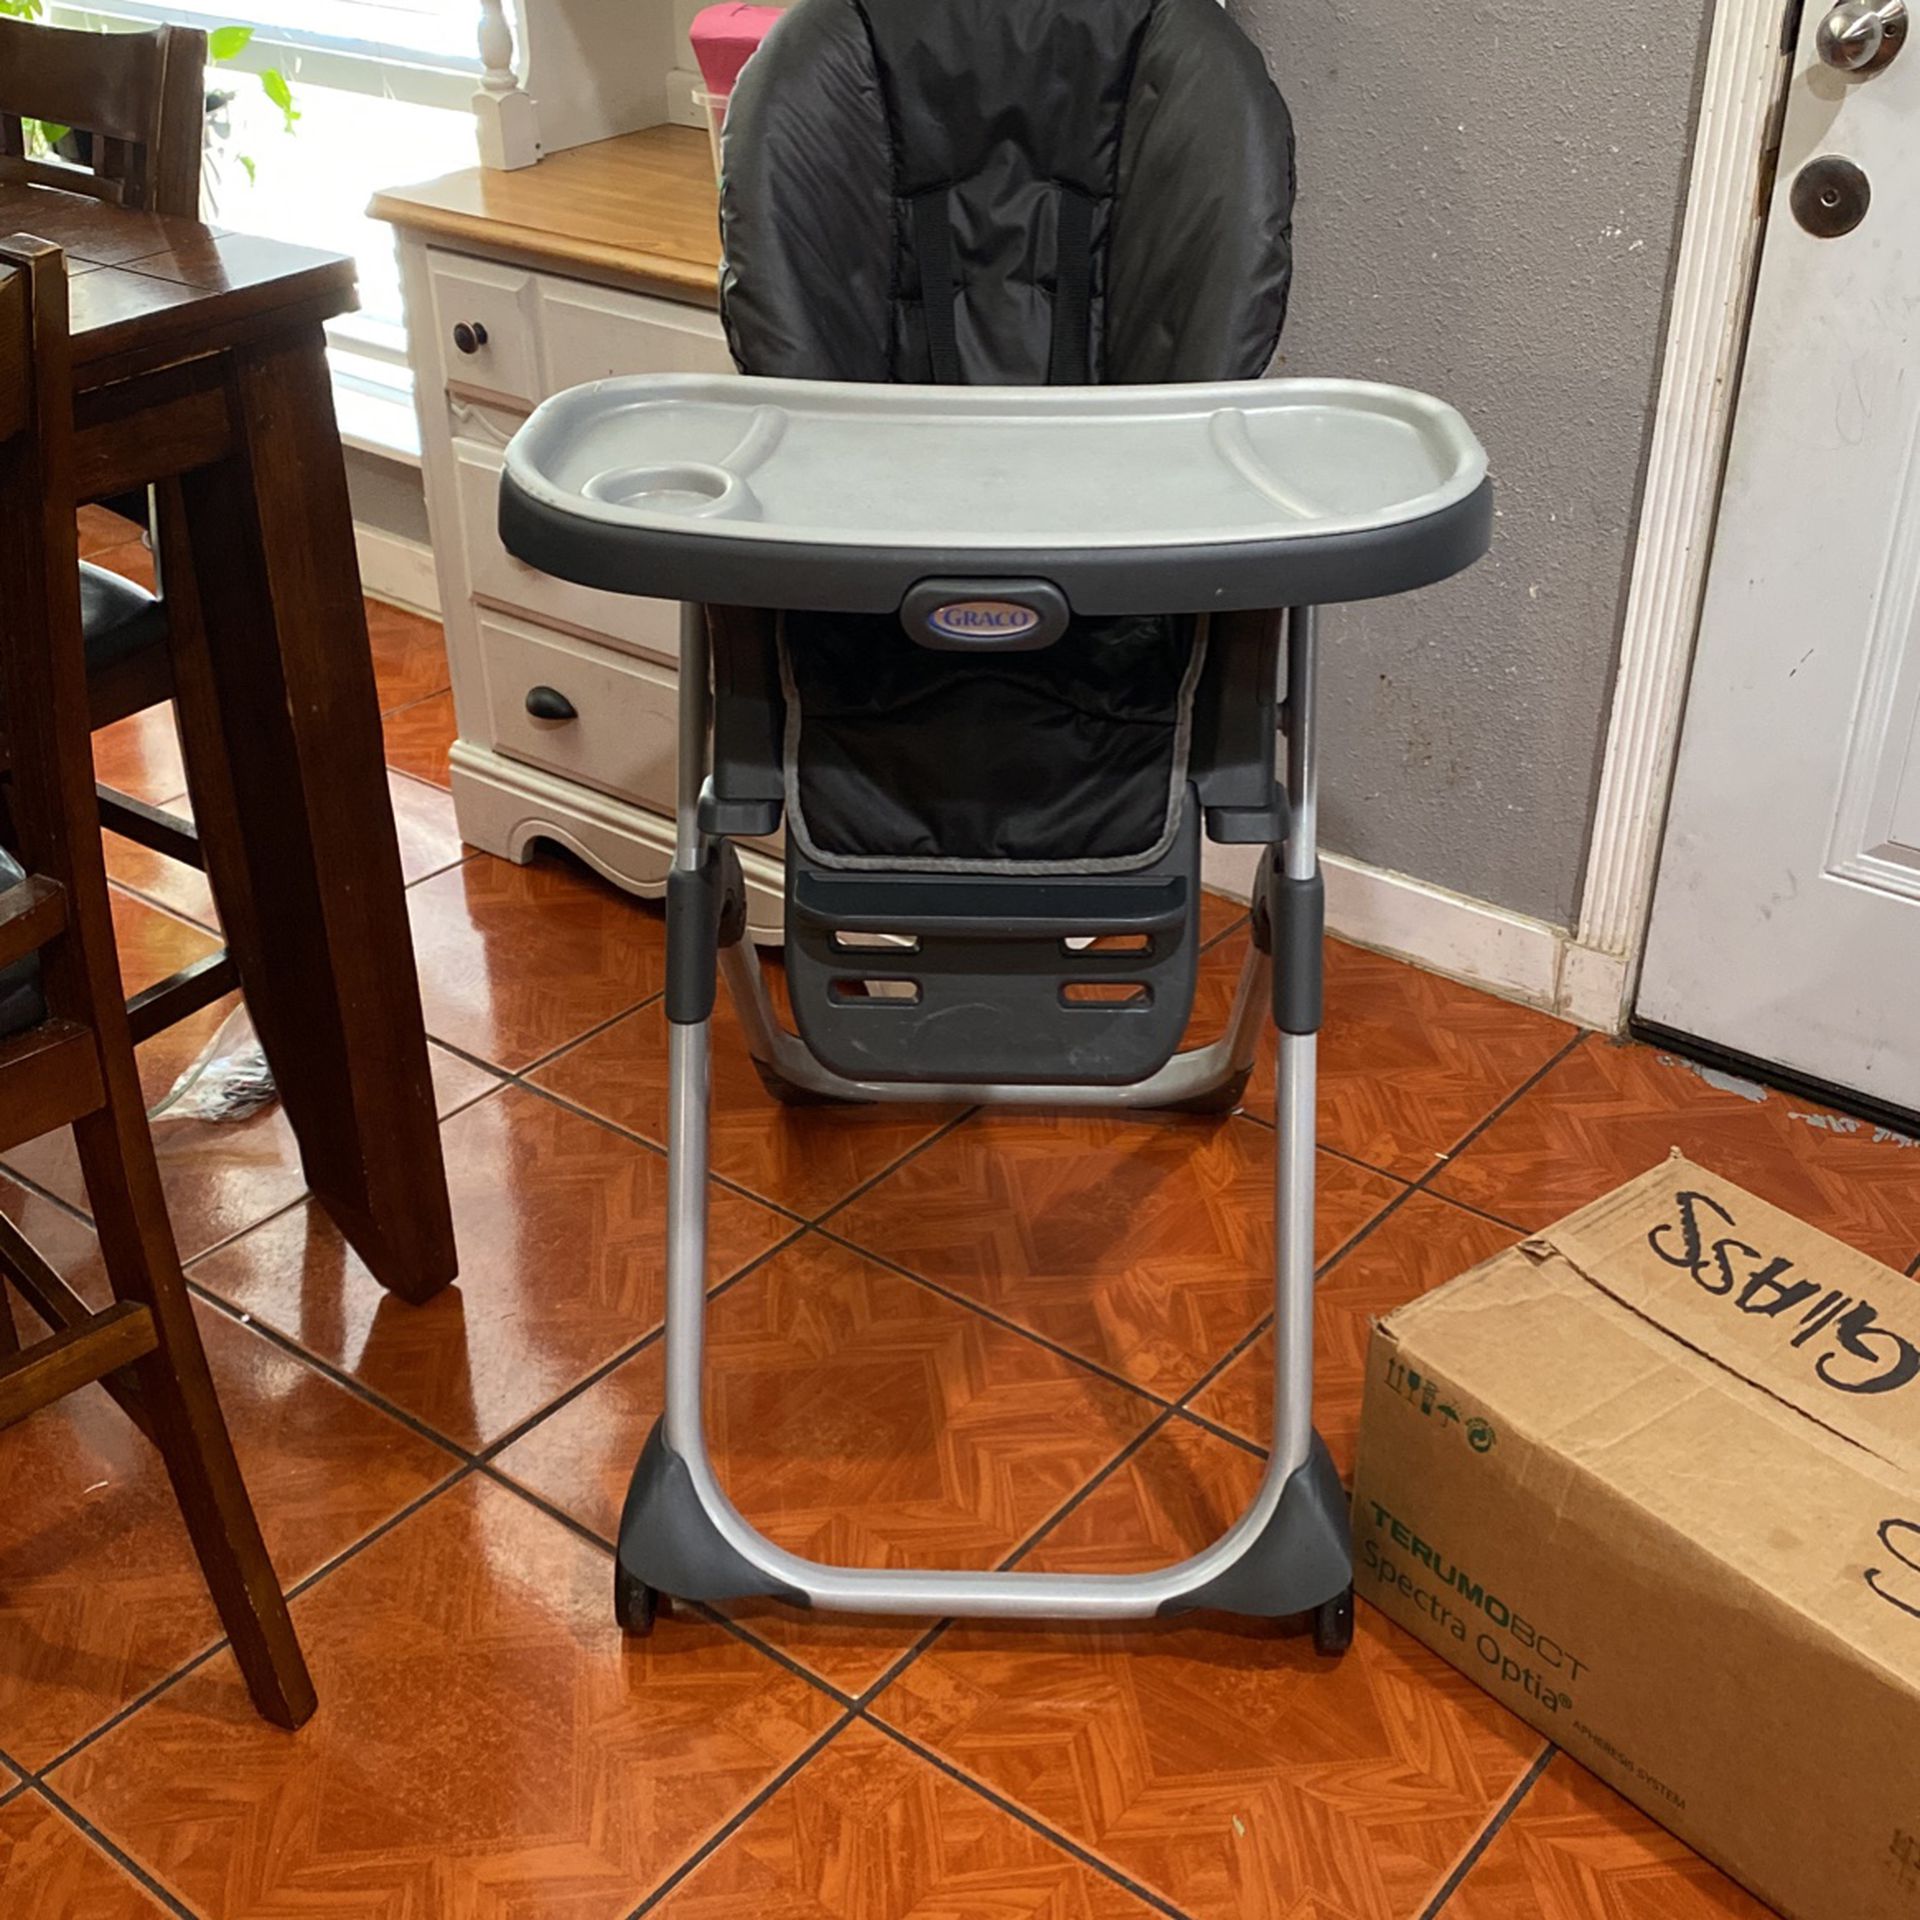 Graco High Chair. It reclines and can take the seat off to strap on dining table chair.  